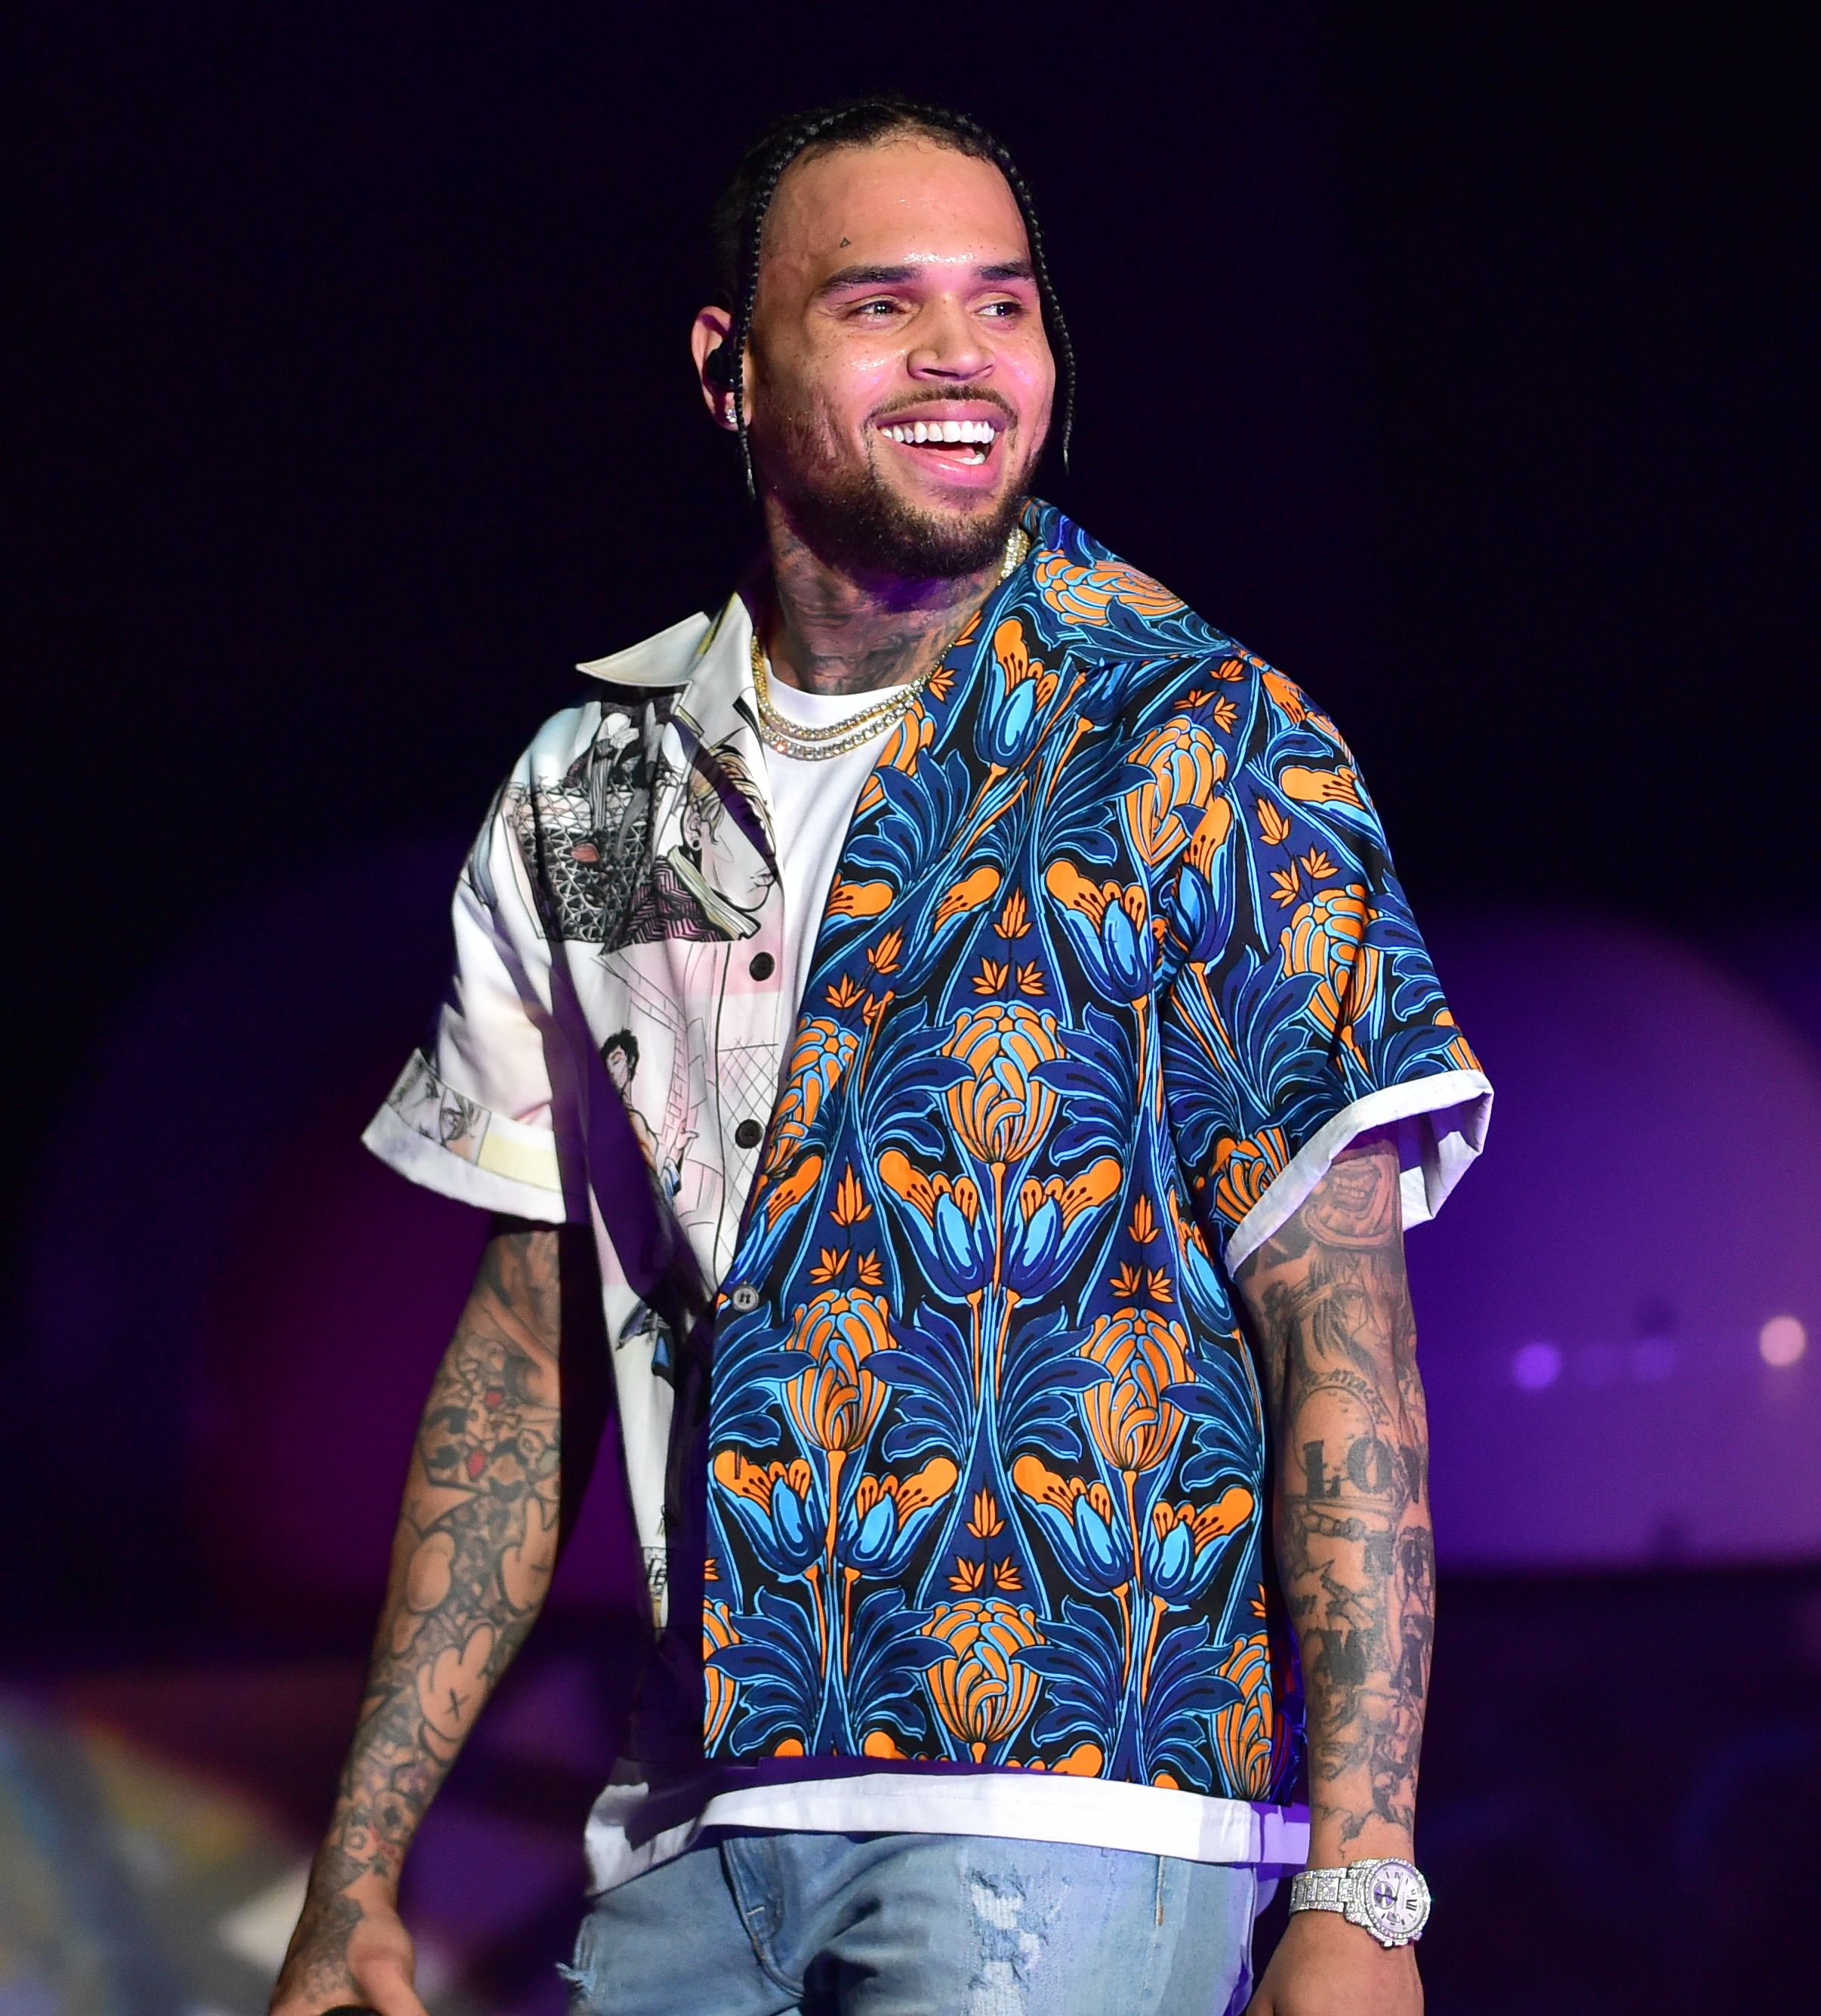  Chris Brown performs at 2019 Tycoon Music Festival at Cellairis Amphitheatre at Lakewood on June 8, 2019 in Atlanta, Georgia. | Source: Getty Images